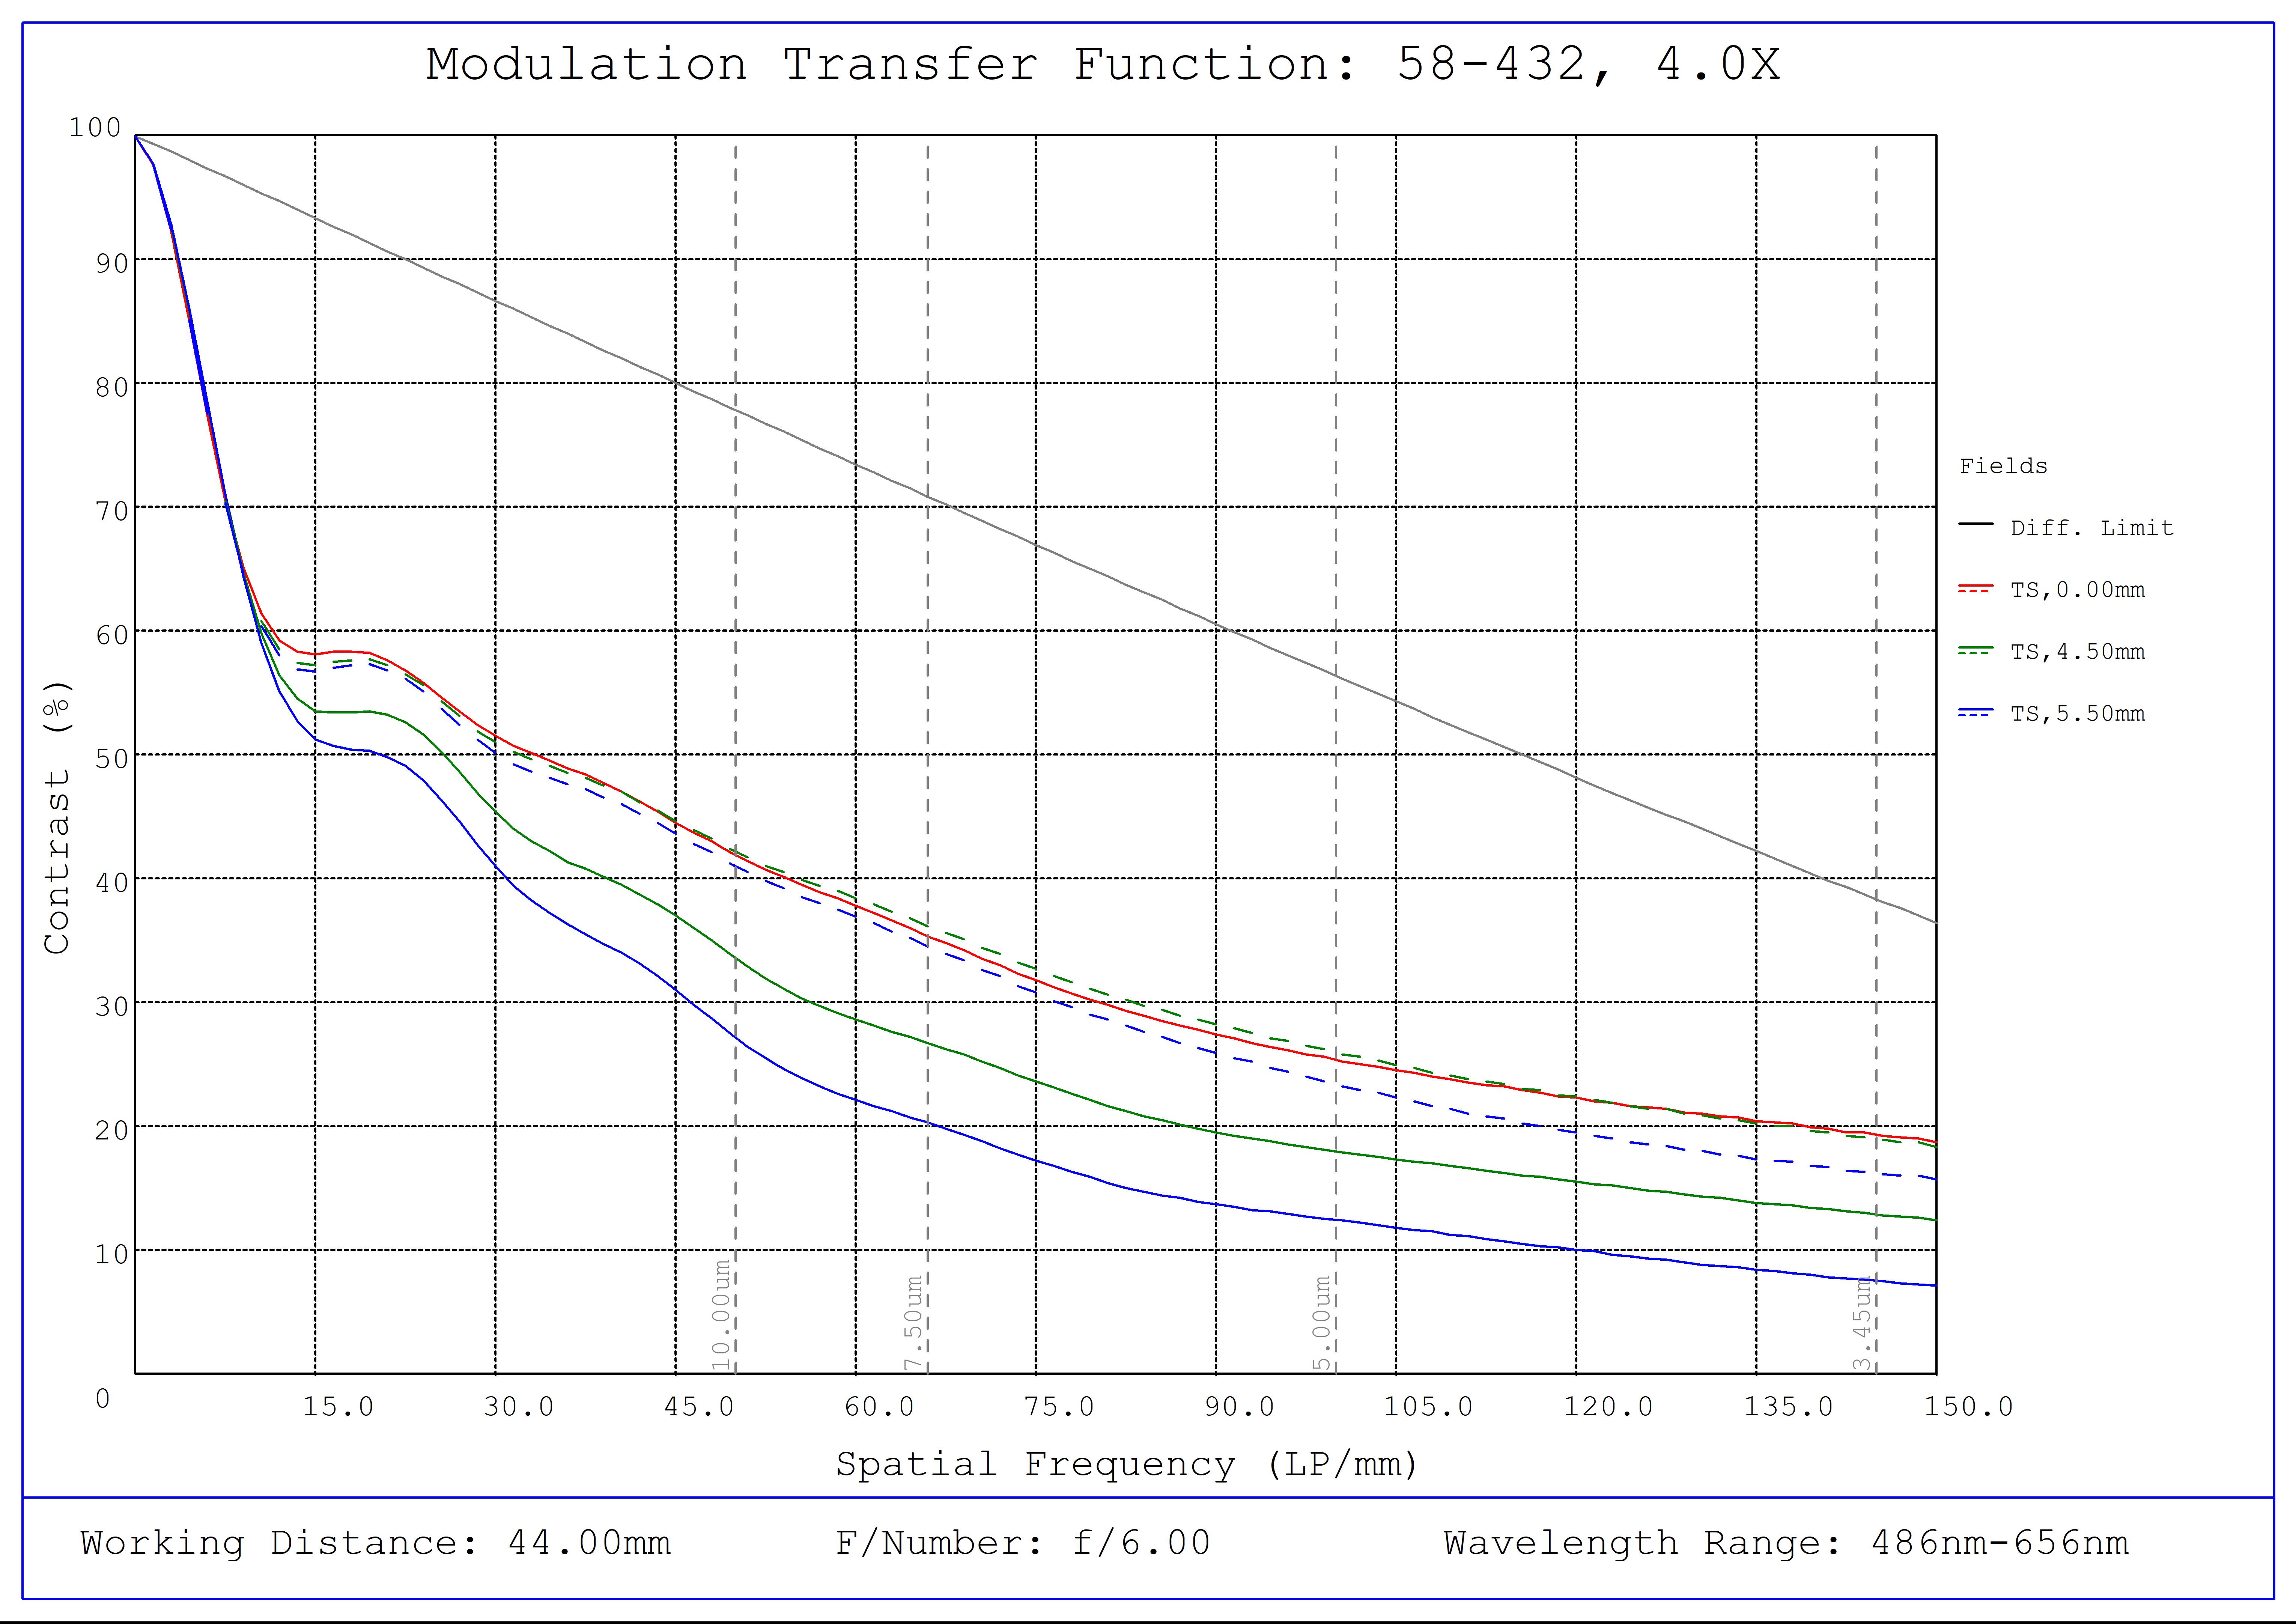 #58-432, 4.0X SilverTL™ Telecentric Lens, Modulated Transfer Function (MTF) Plot, 44mm Working Distance, f6